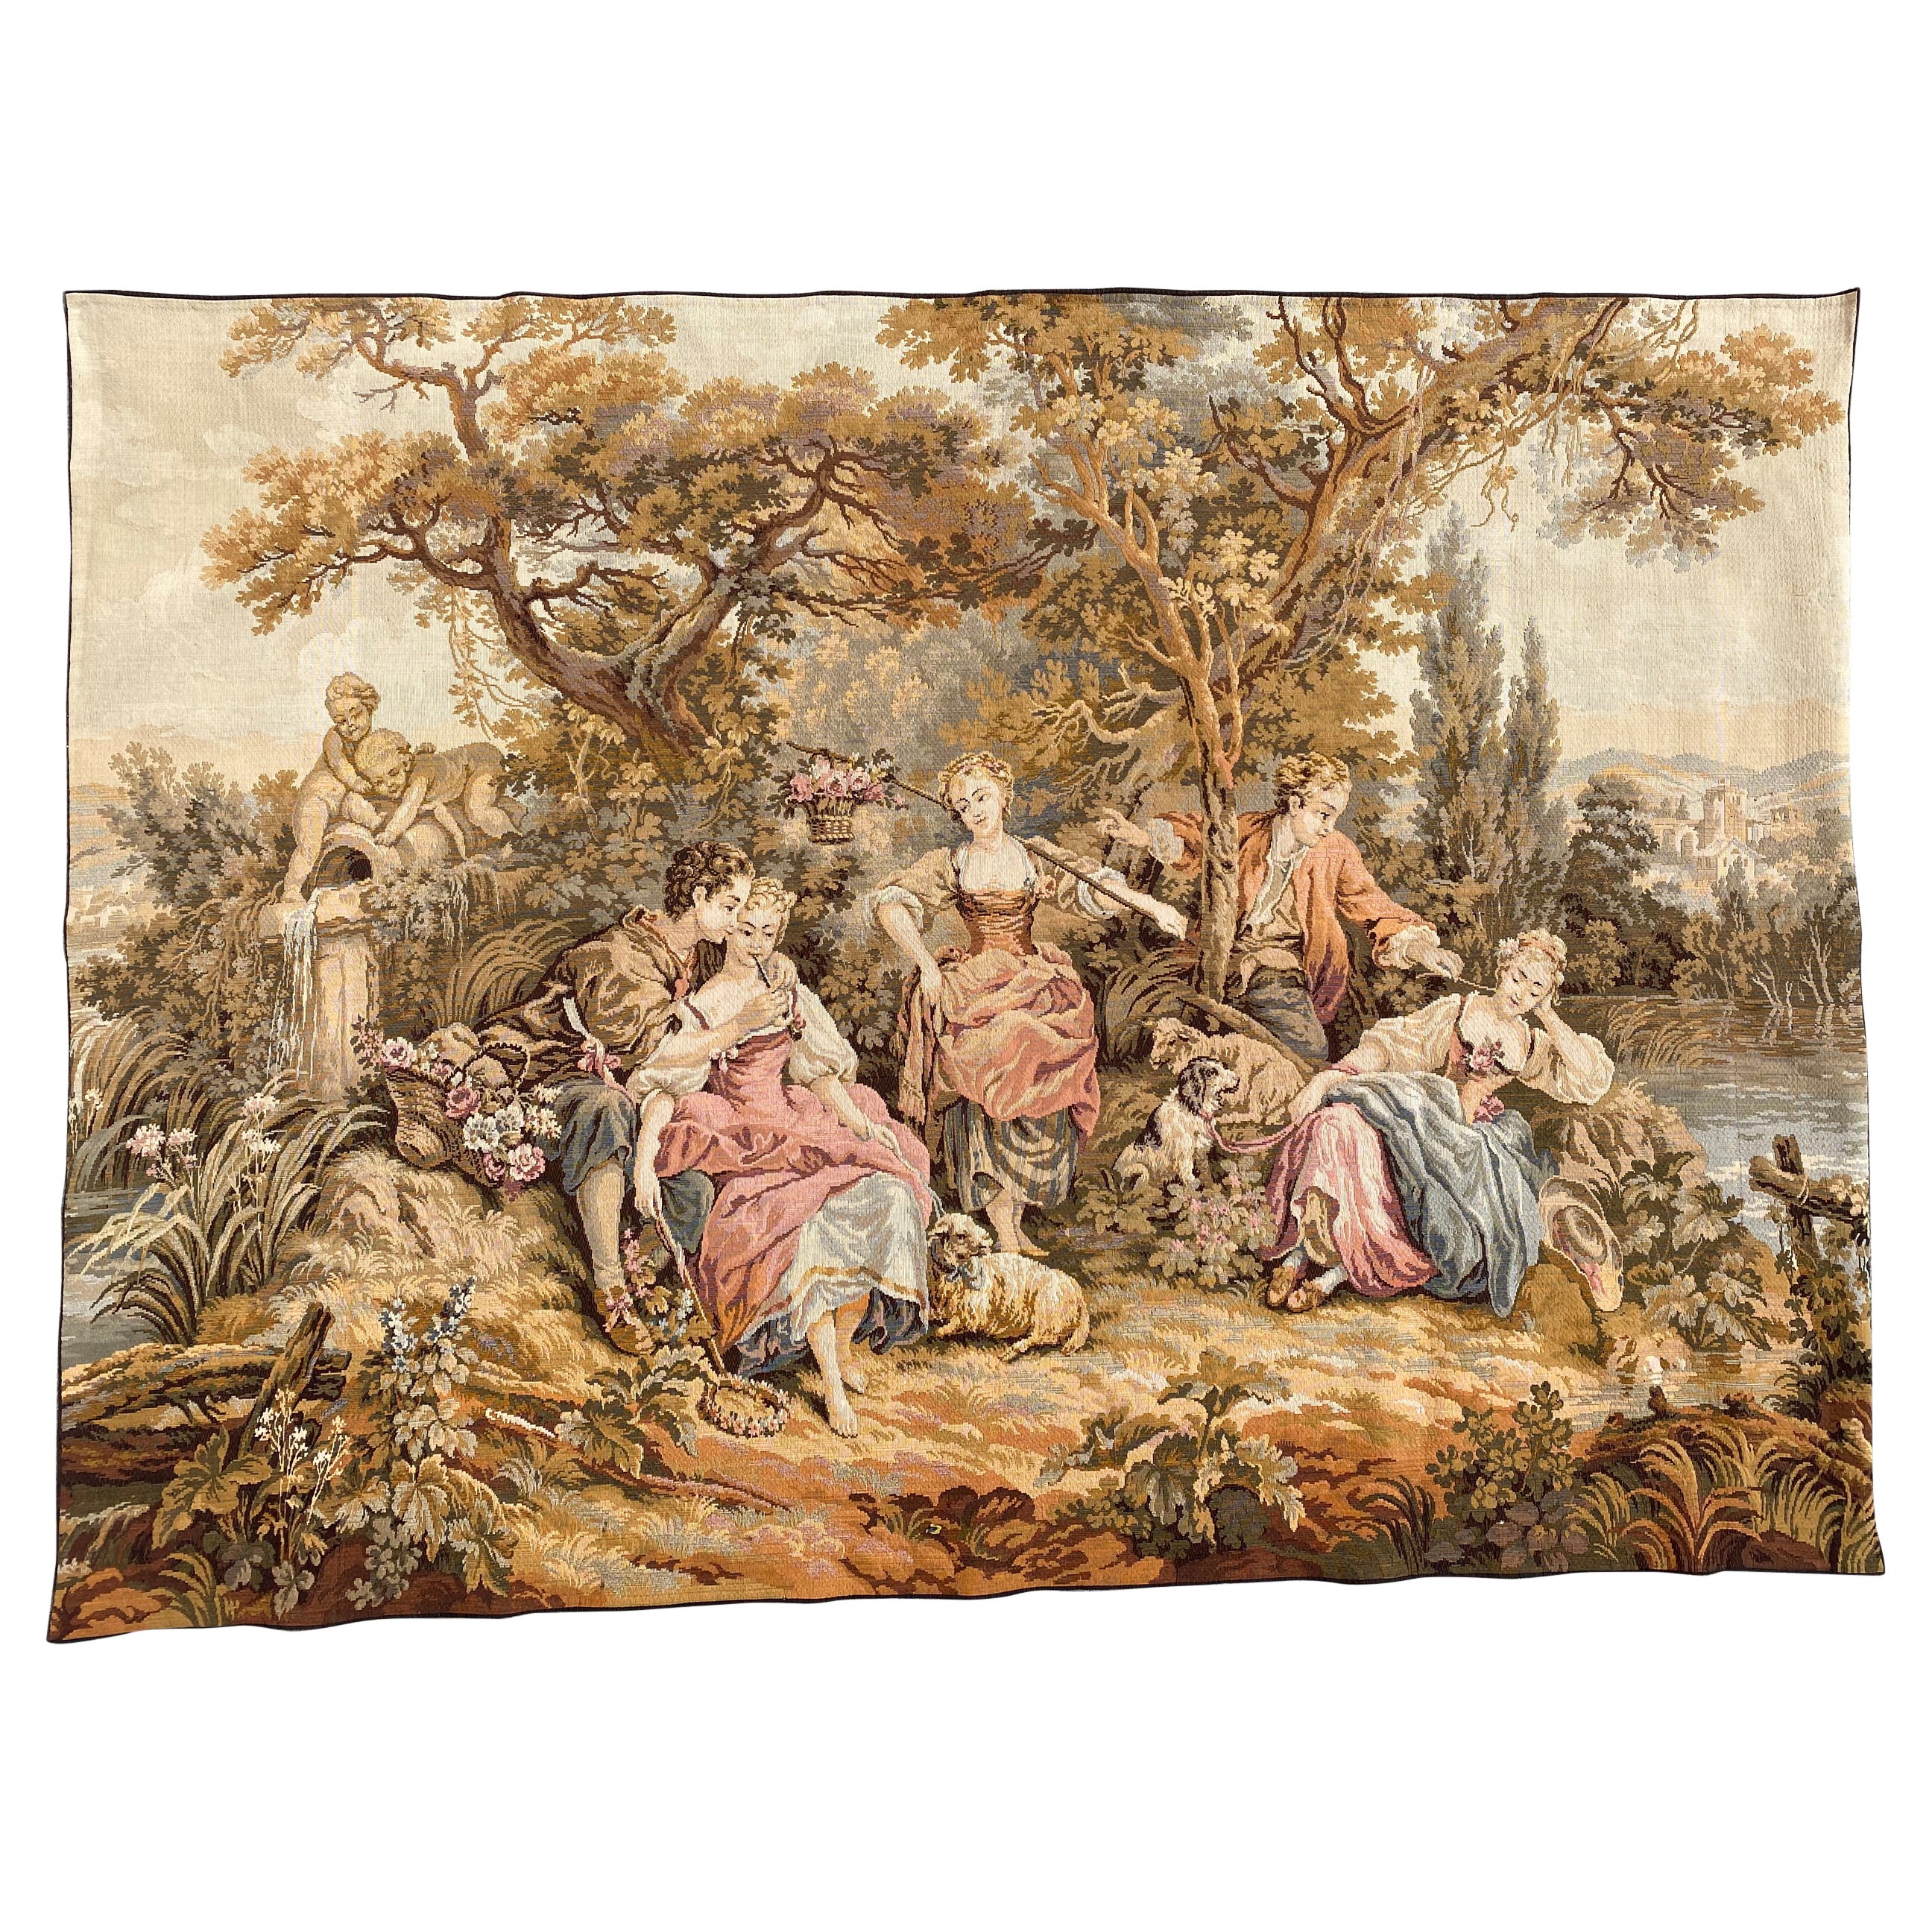 Bobyrug's Vintage French Aubusson Style Jaquar Tapestry " pastoral loves "